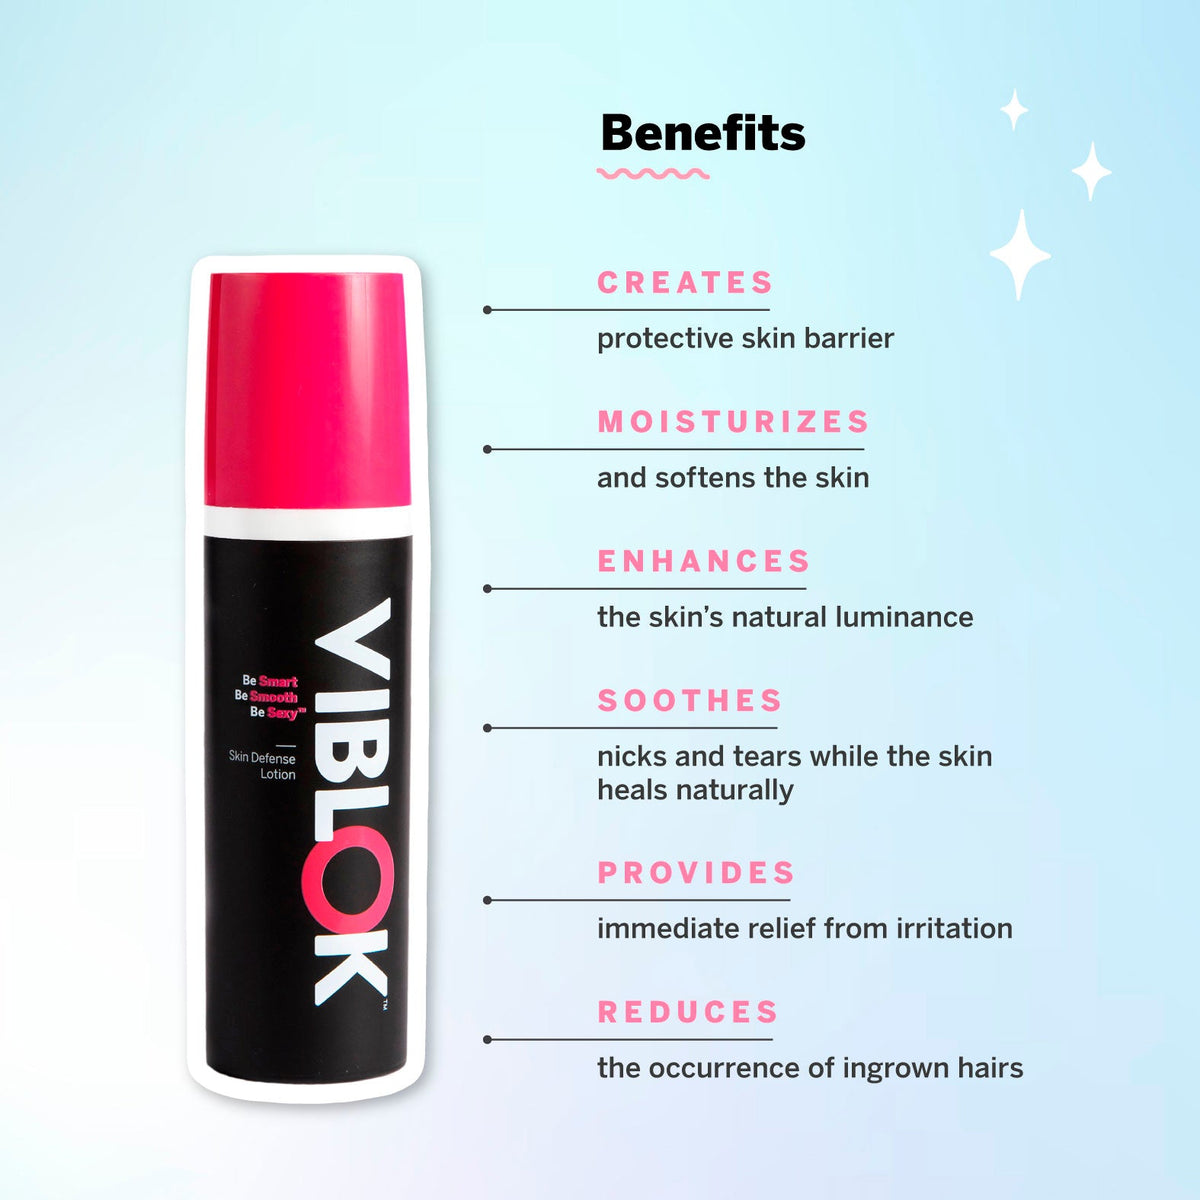 Description of VIBLOK Skin Defense Lotion benefits. Creates protective skin barrier. Moisturizes. Enhances the skin's natural luminance. Soothes. Provides immediate relief. Prevents ingrown hairs.